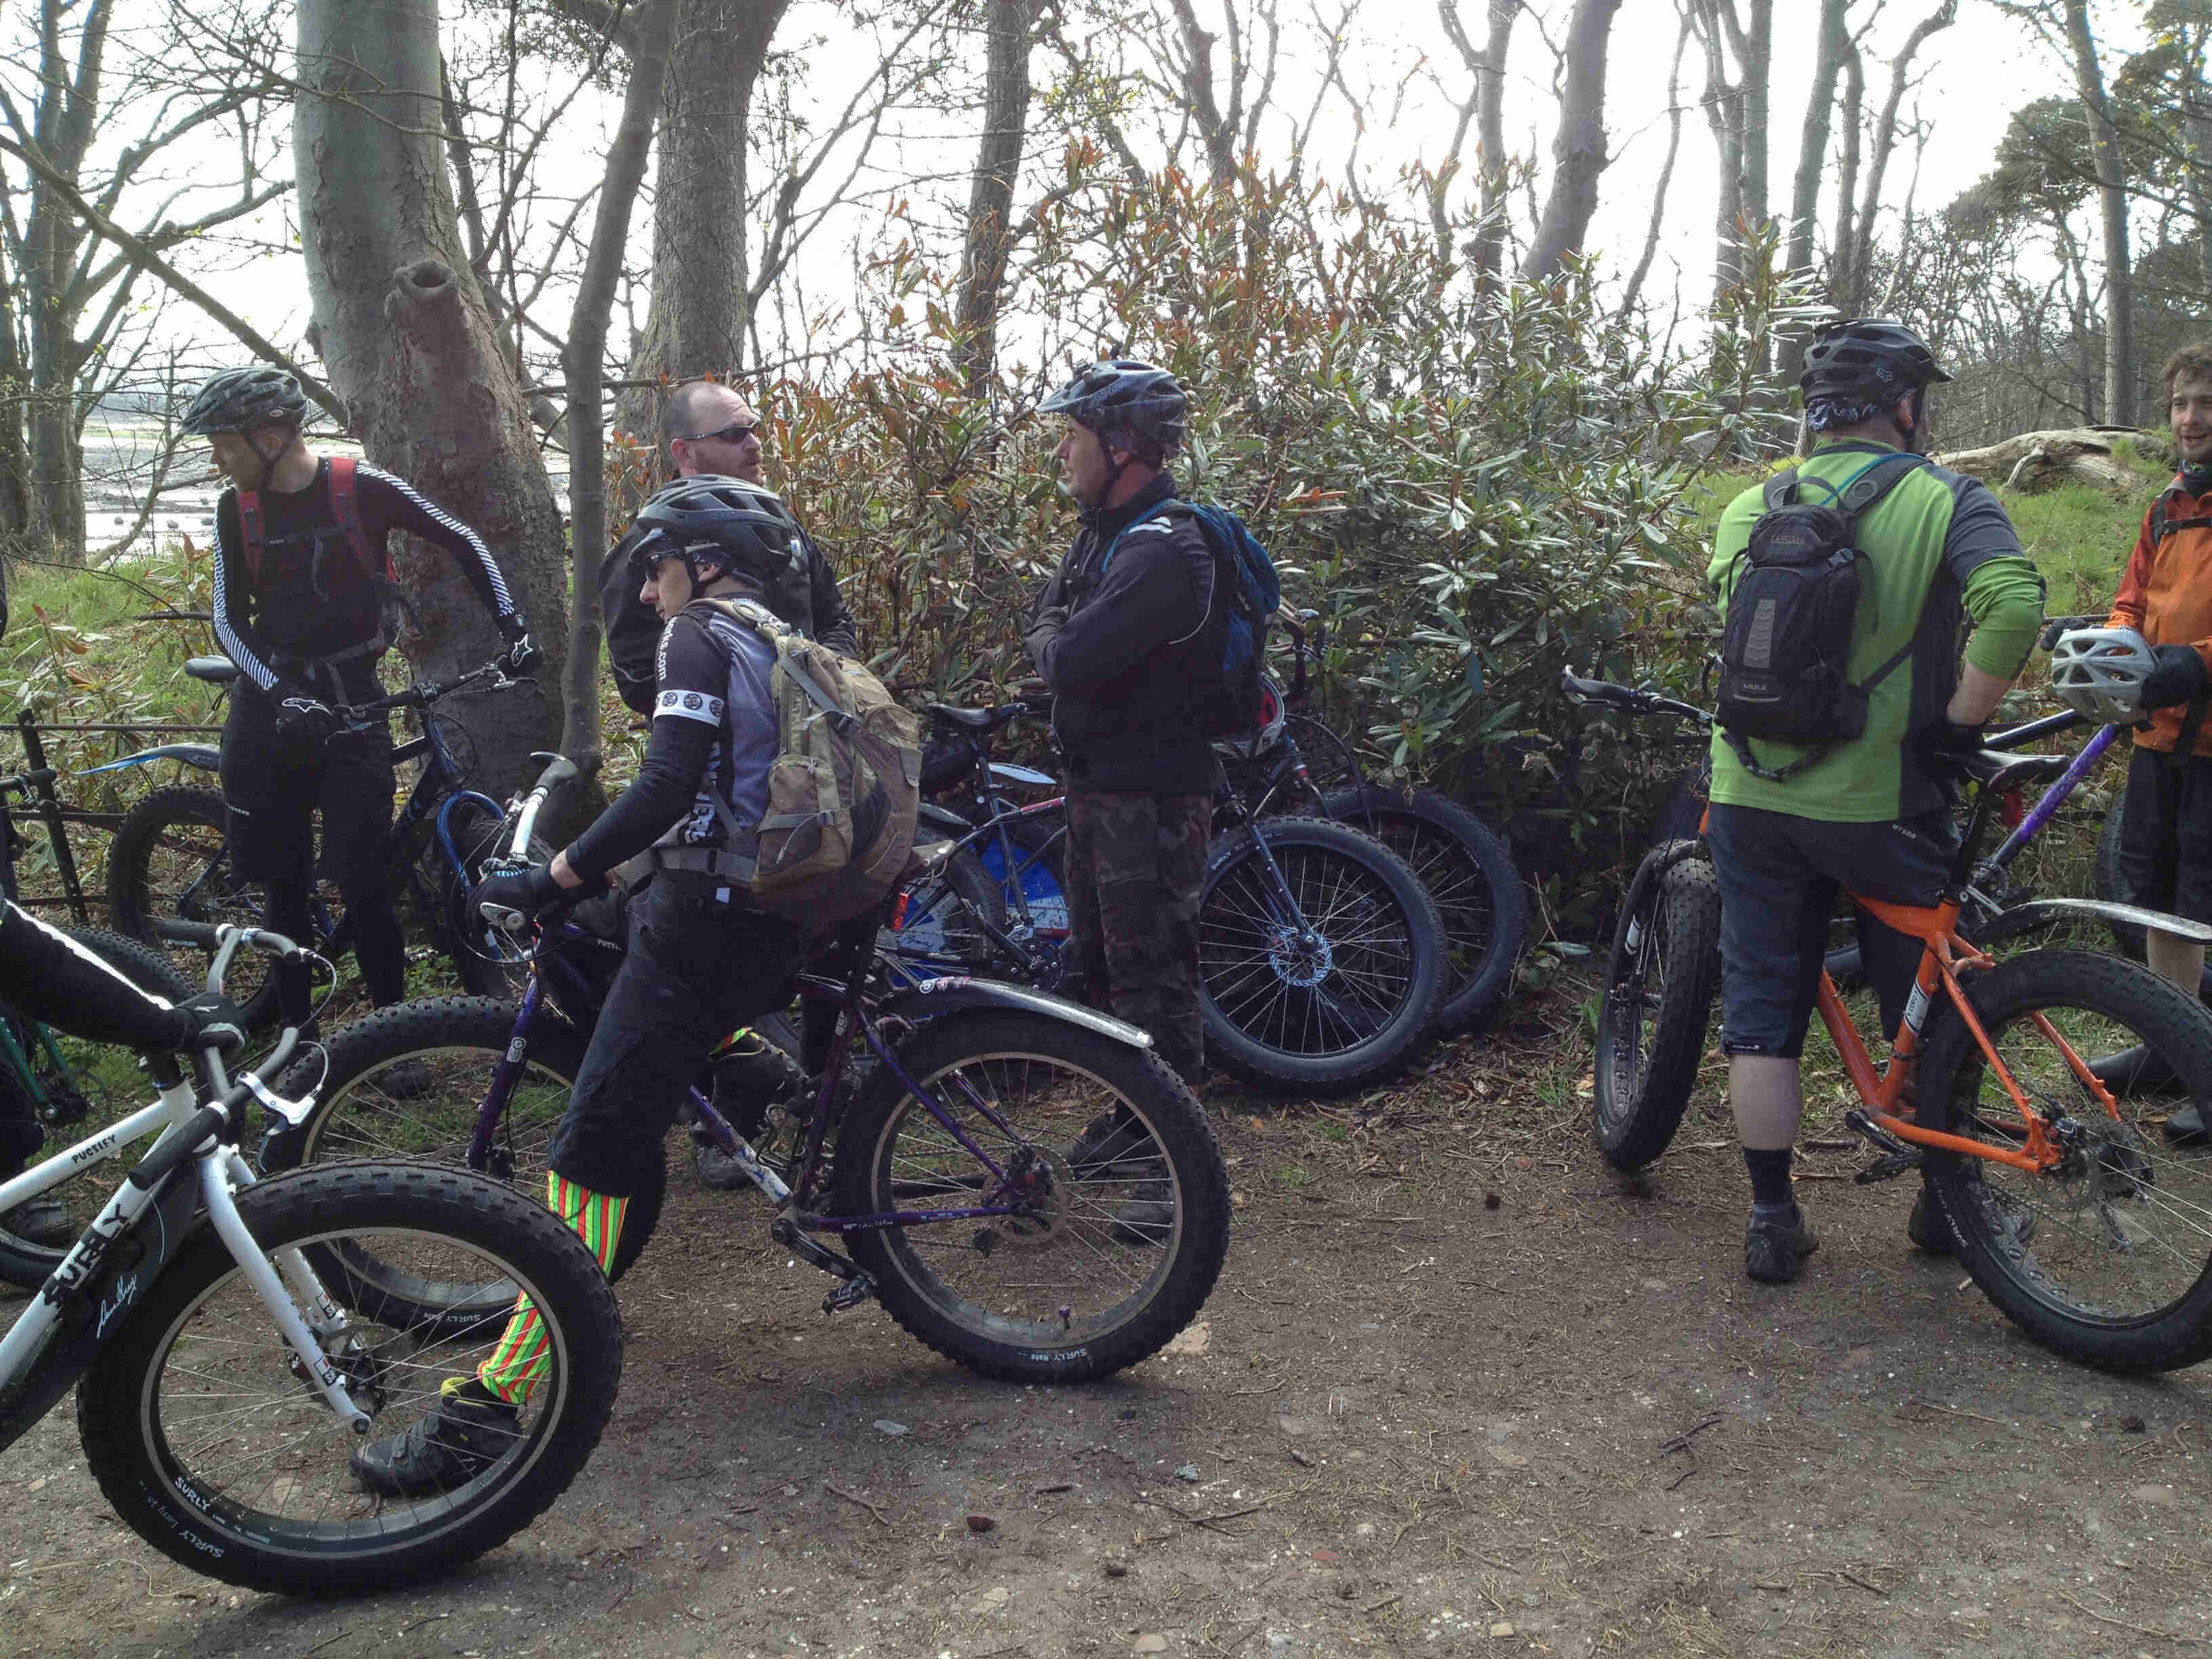 A group of cyclists, standing around with their Surly fat bikes, on a dirt clearing in the woods